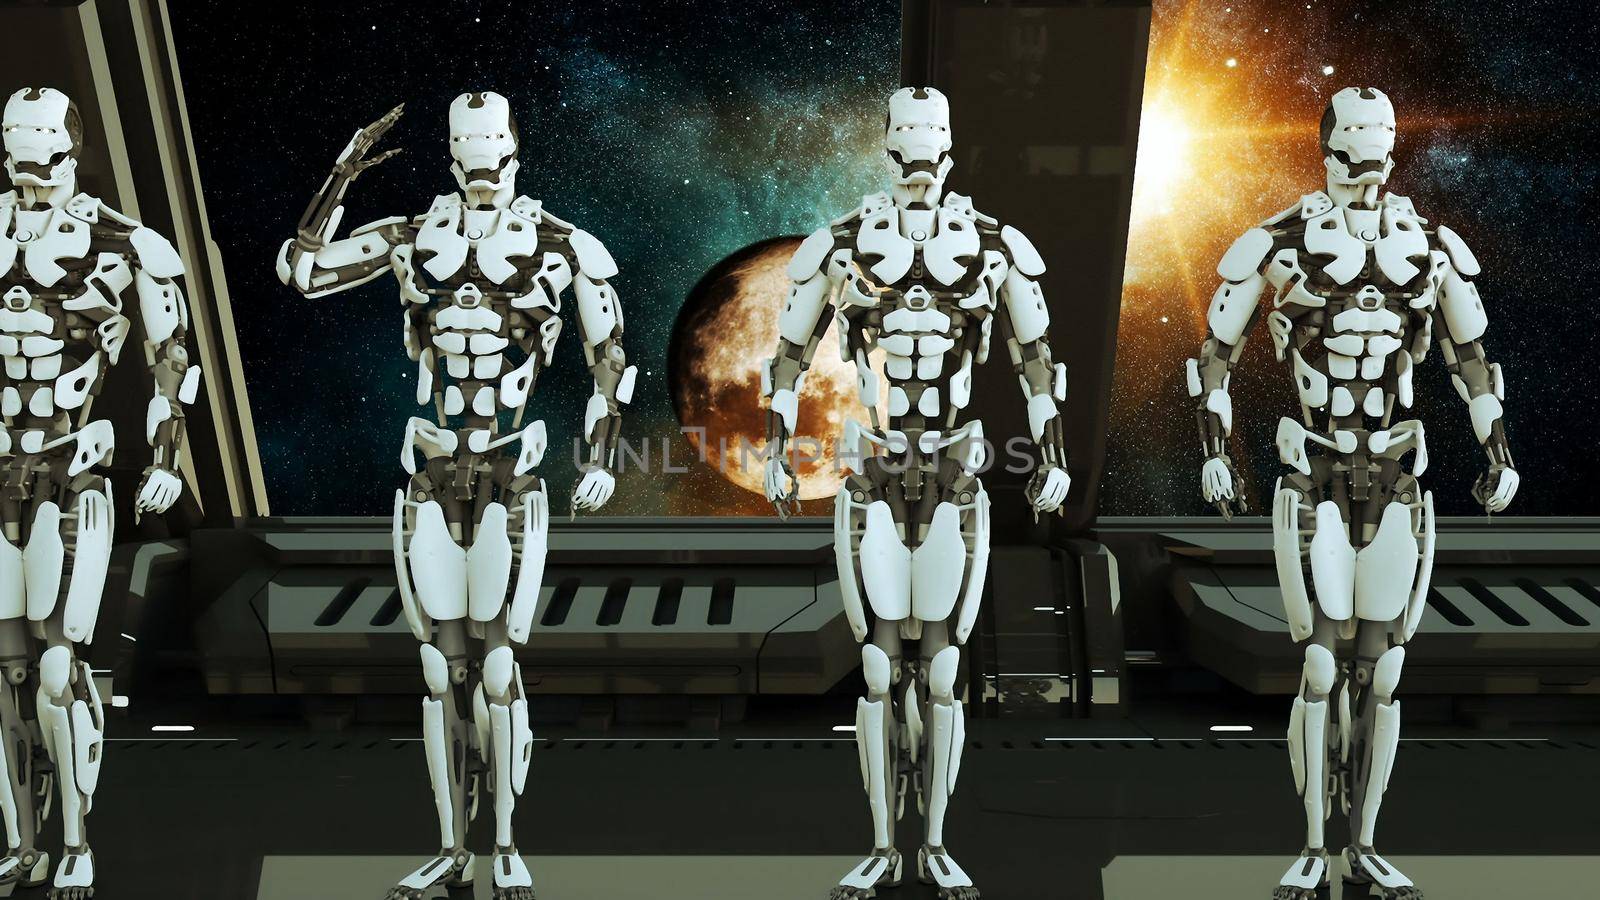 Robots soldiers on a spaceship salute against the background of the Universe and Planets